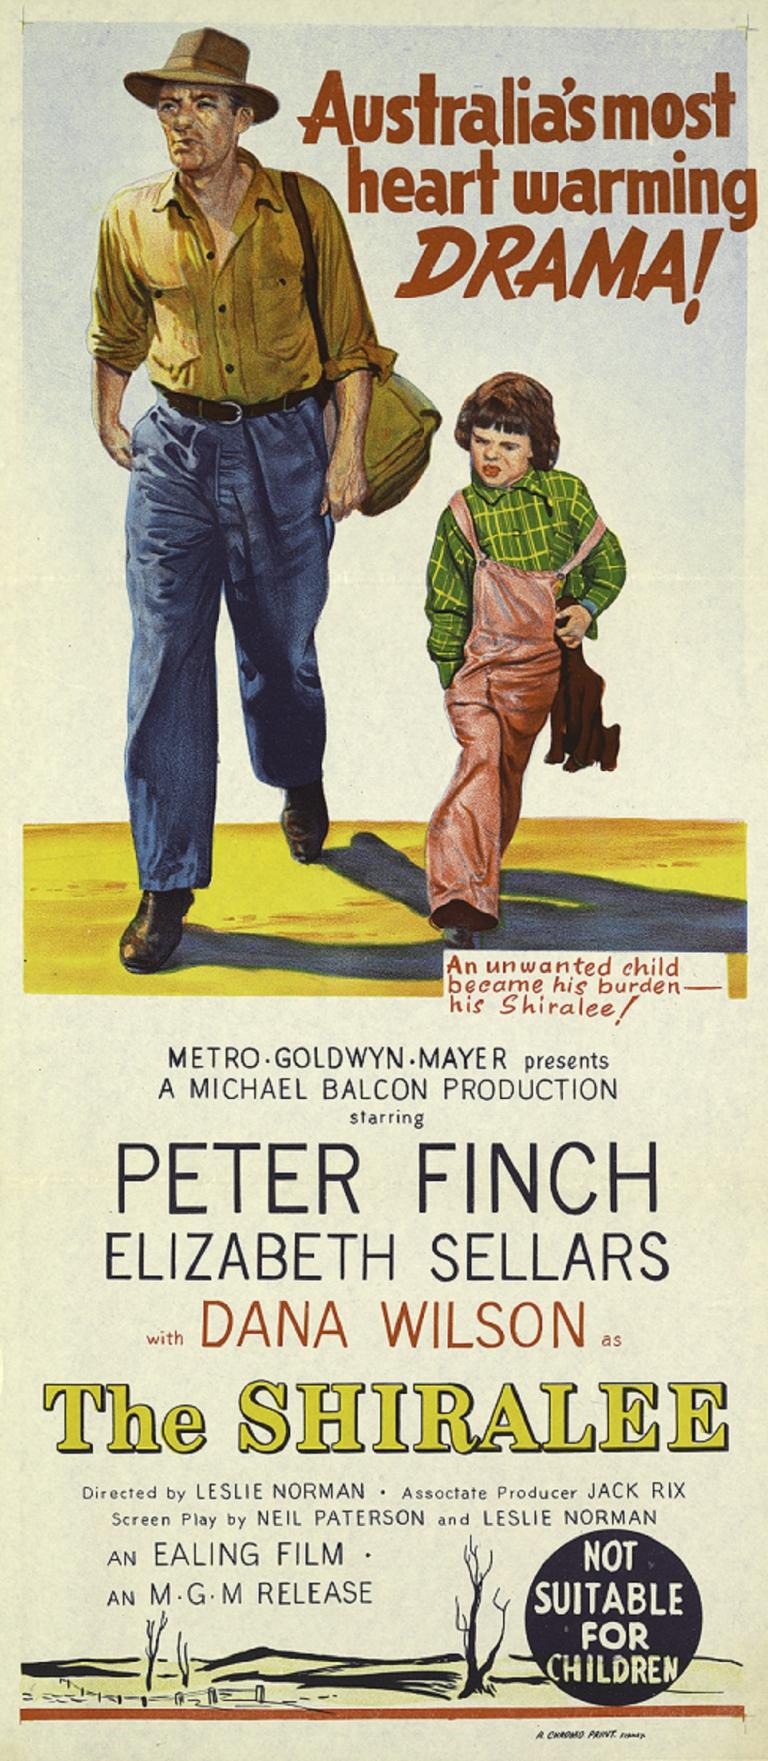 Daybill for The Shiralee. Illustration of Peter Finch and a child. Text reads: Australia's most heart warming drama! Underneath illustration are production and film credits